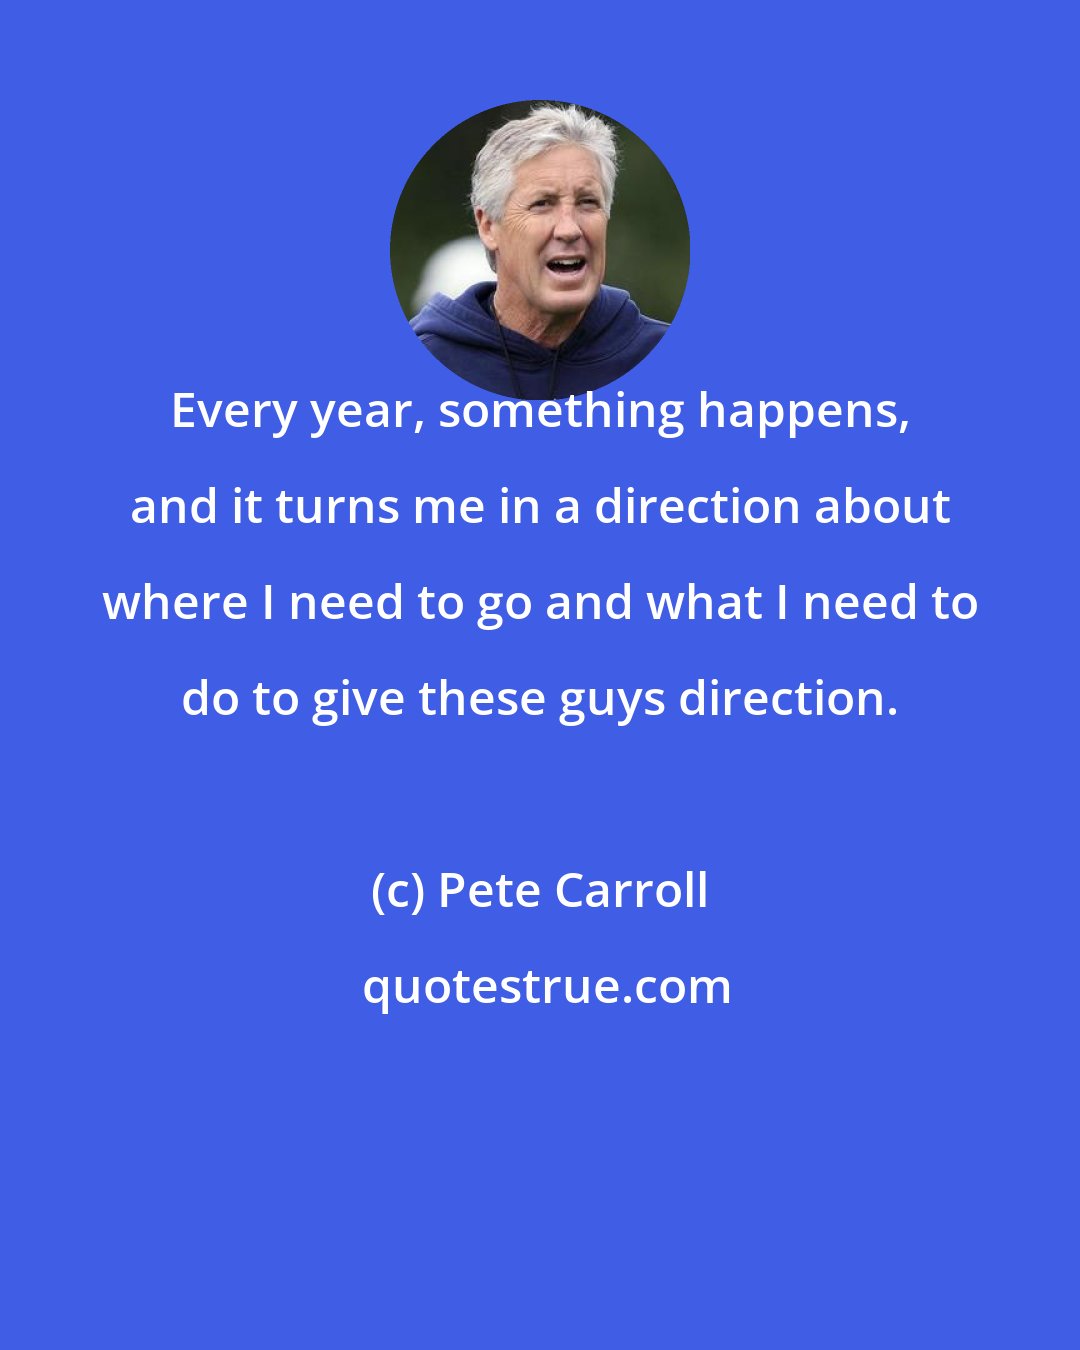 Pete Carroll: Every year, something happens, and it turns me in a direction about where I need to go and what I need to do to give these guys direction.